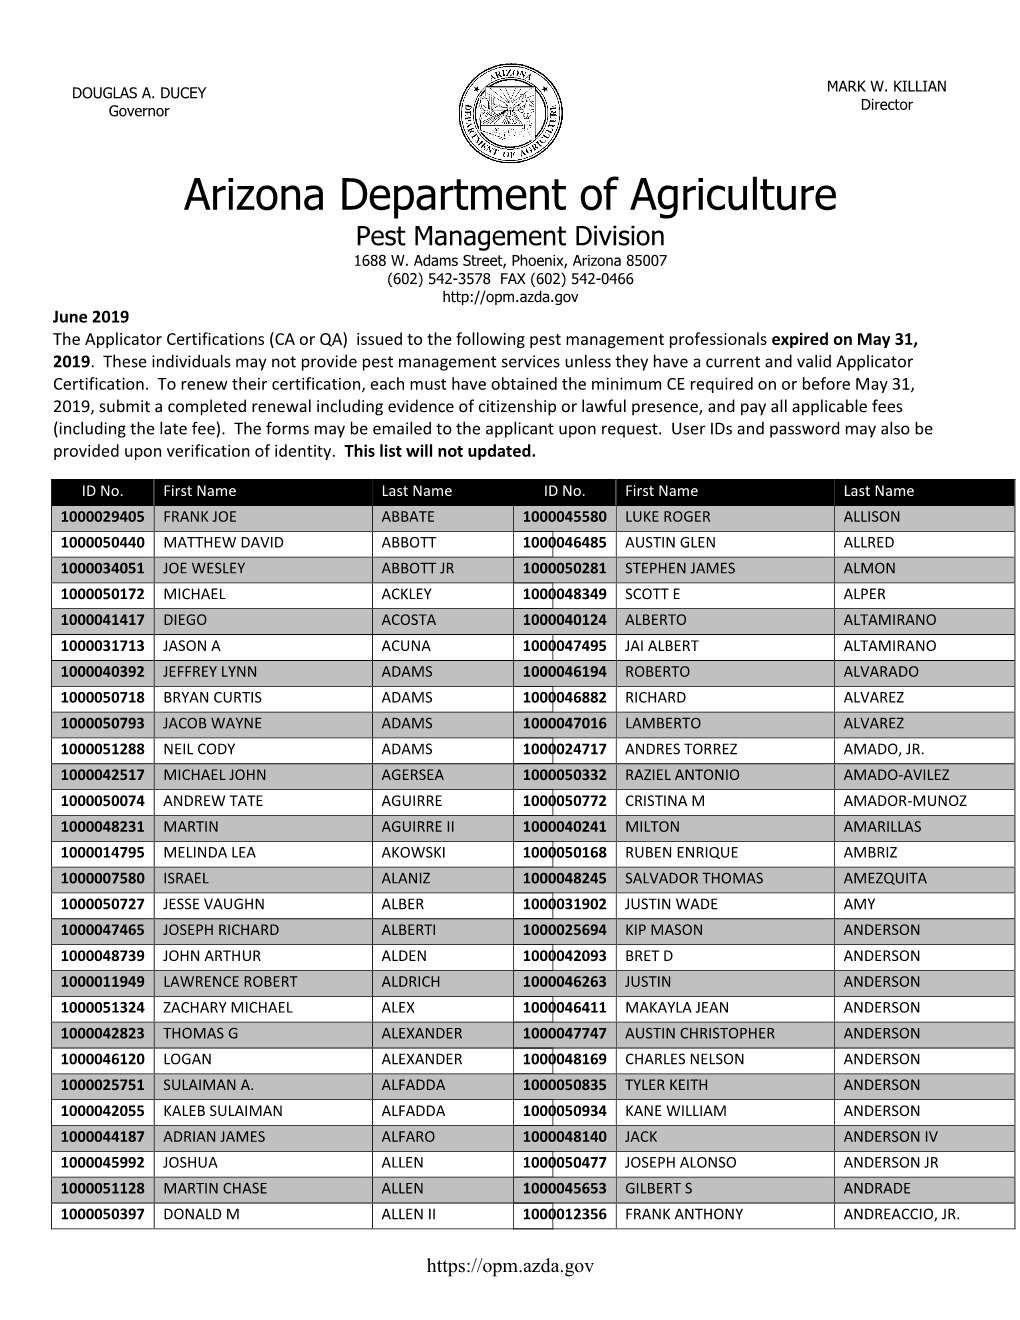 Applicator Certifications That Have Expired As of May 31,2019